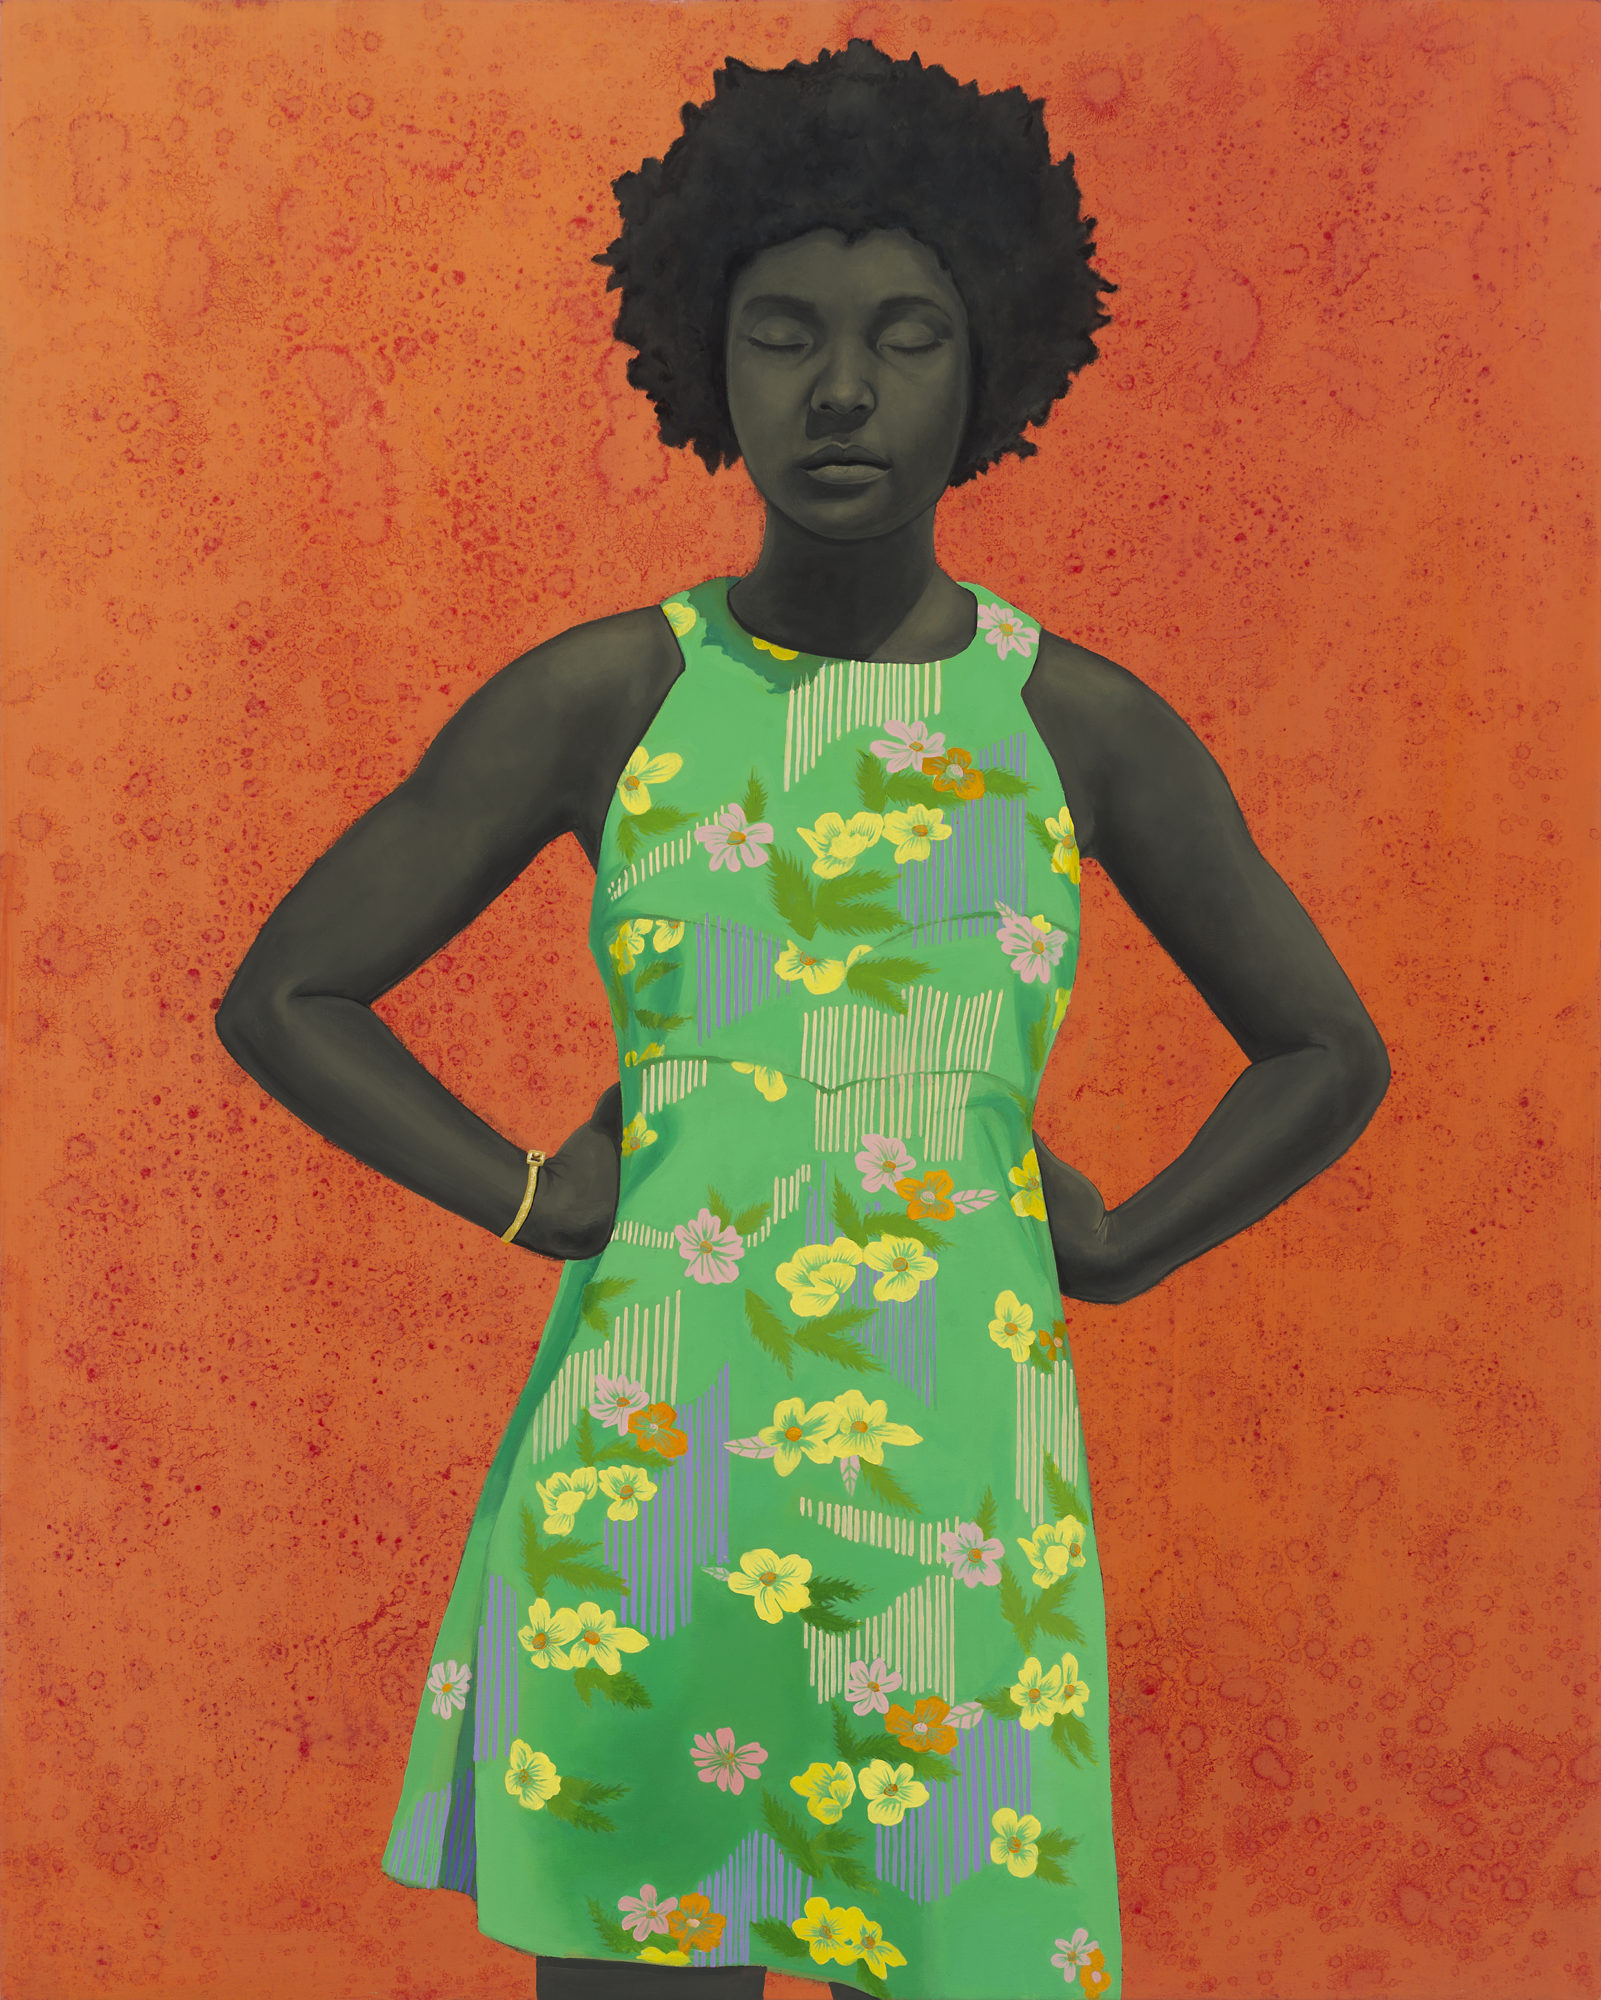 A woman in a floral green dress poses in front of a deep orange, textured background